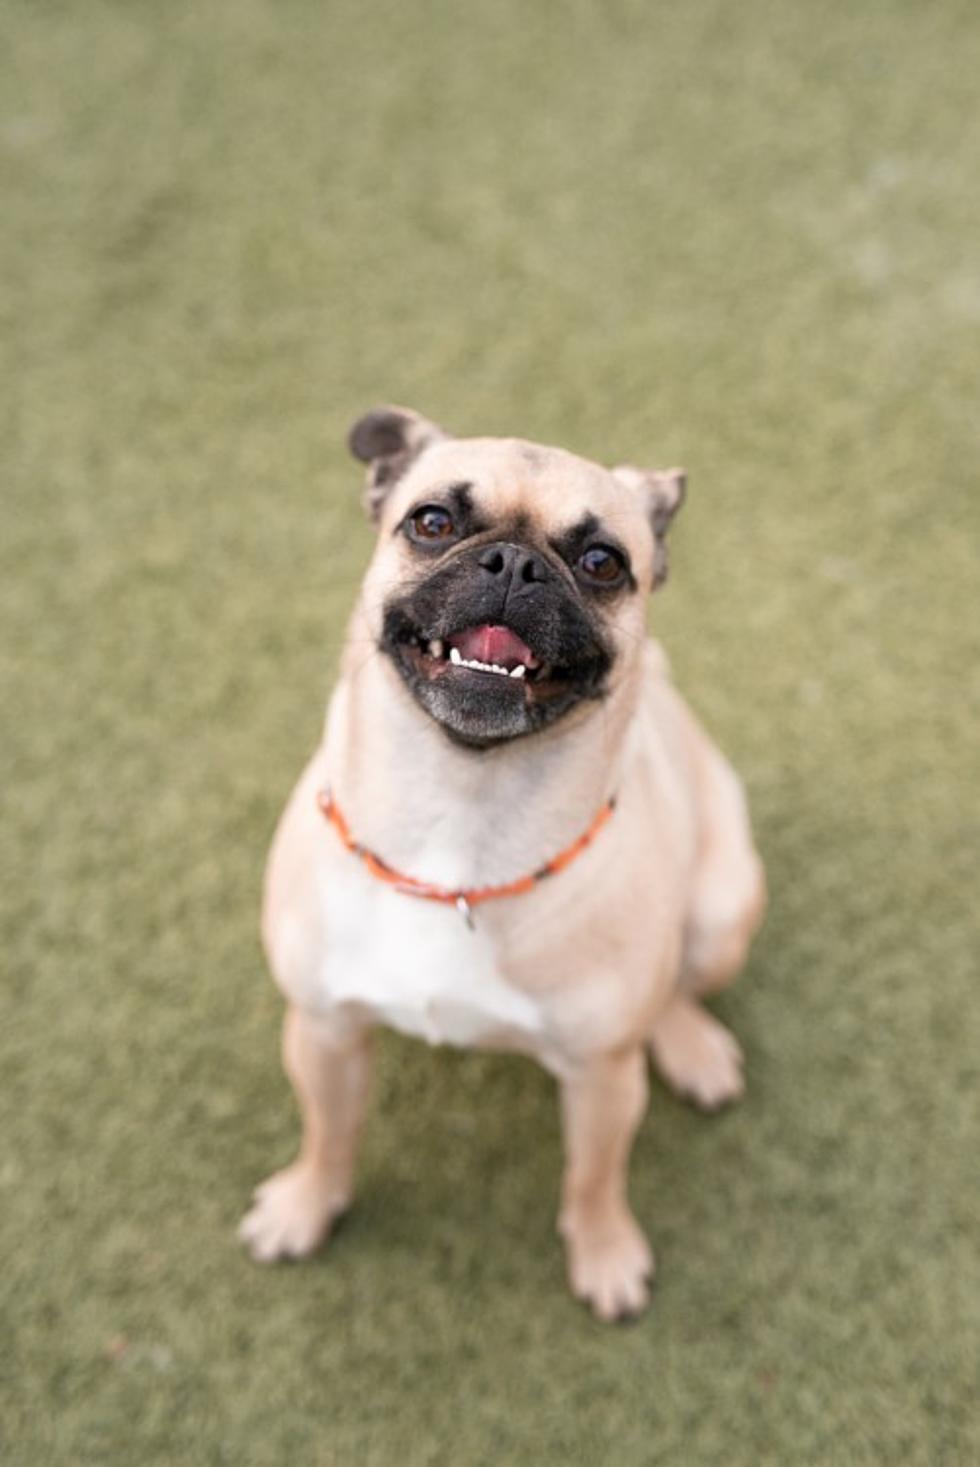 Meet Emma, the Happy Pug and Other Adoptable Pets in Wenatchee